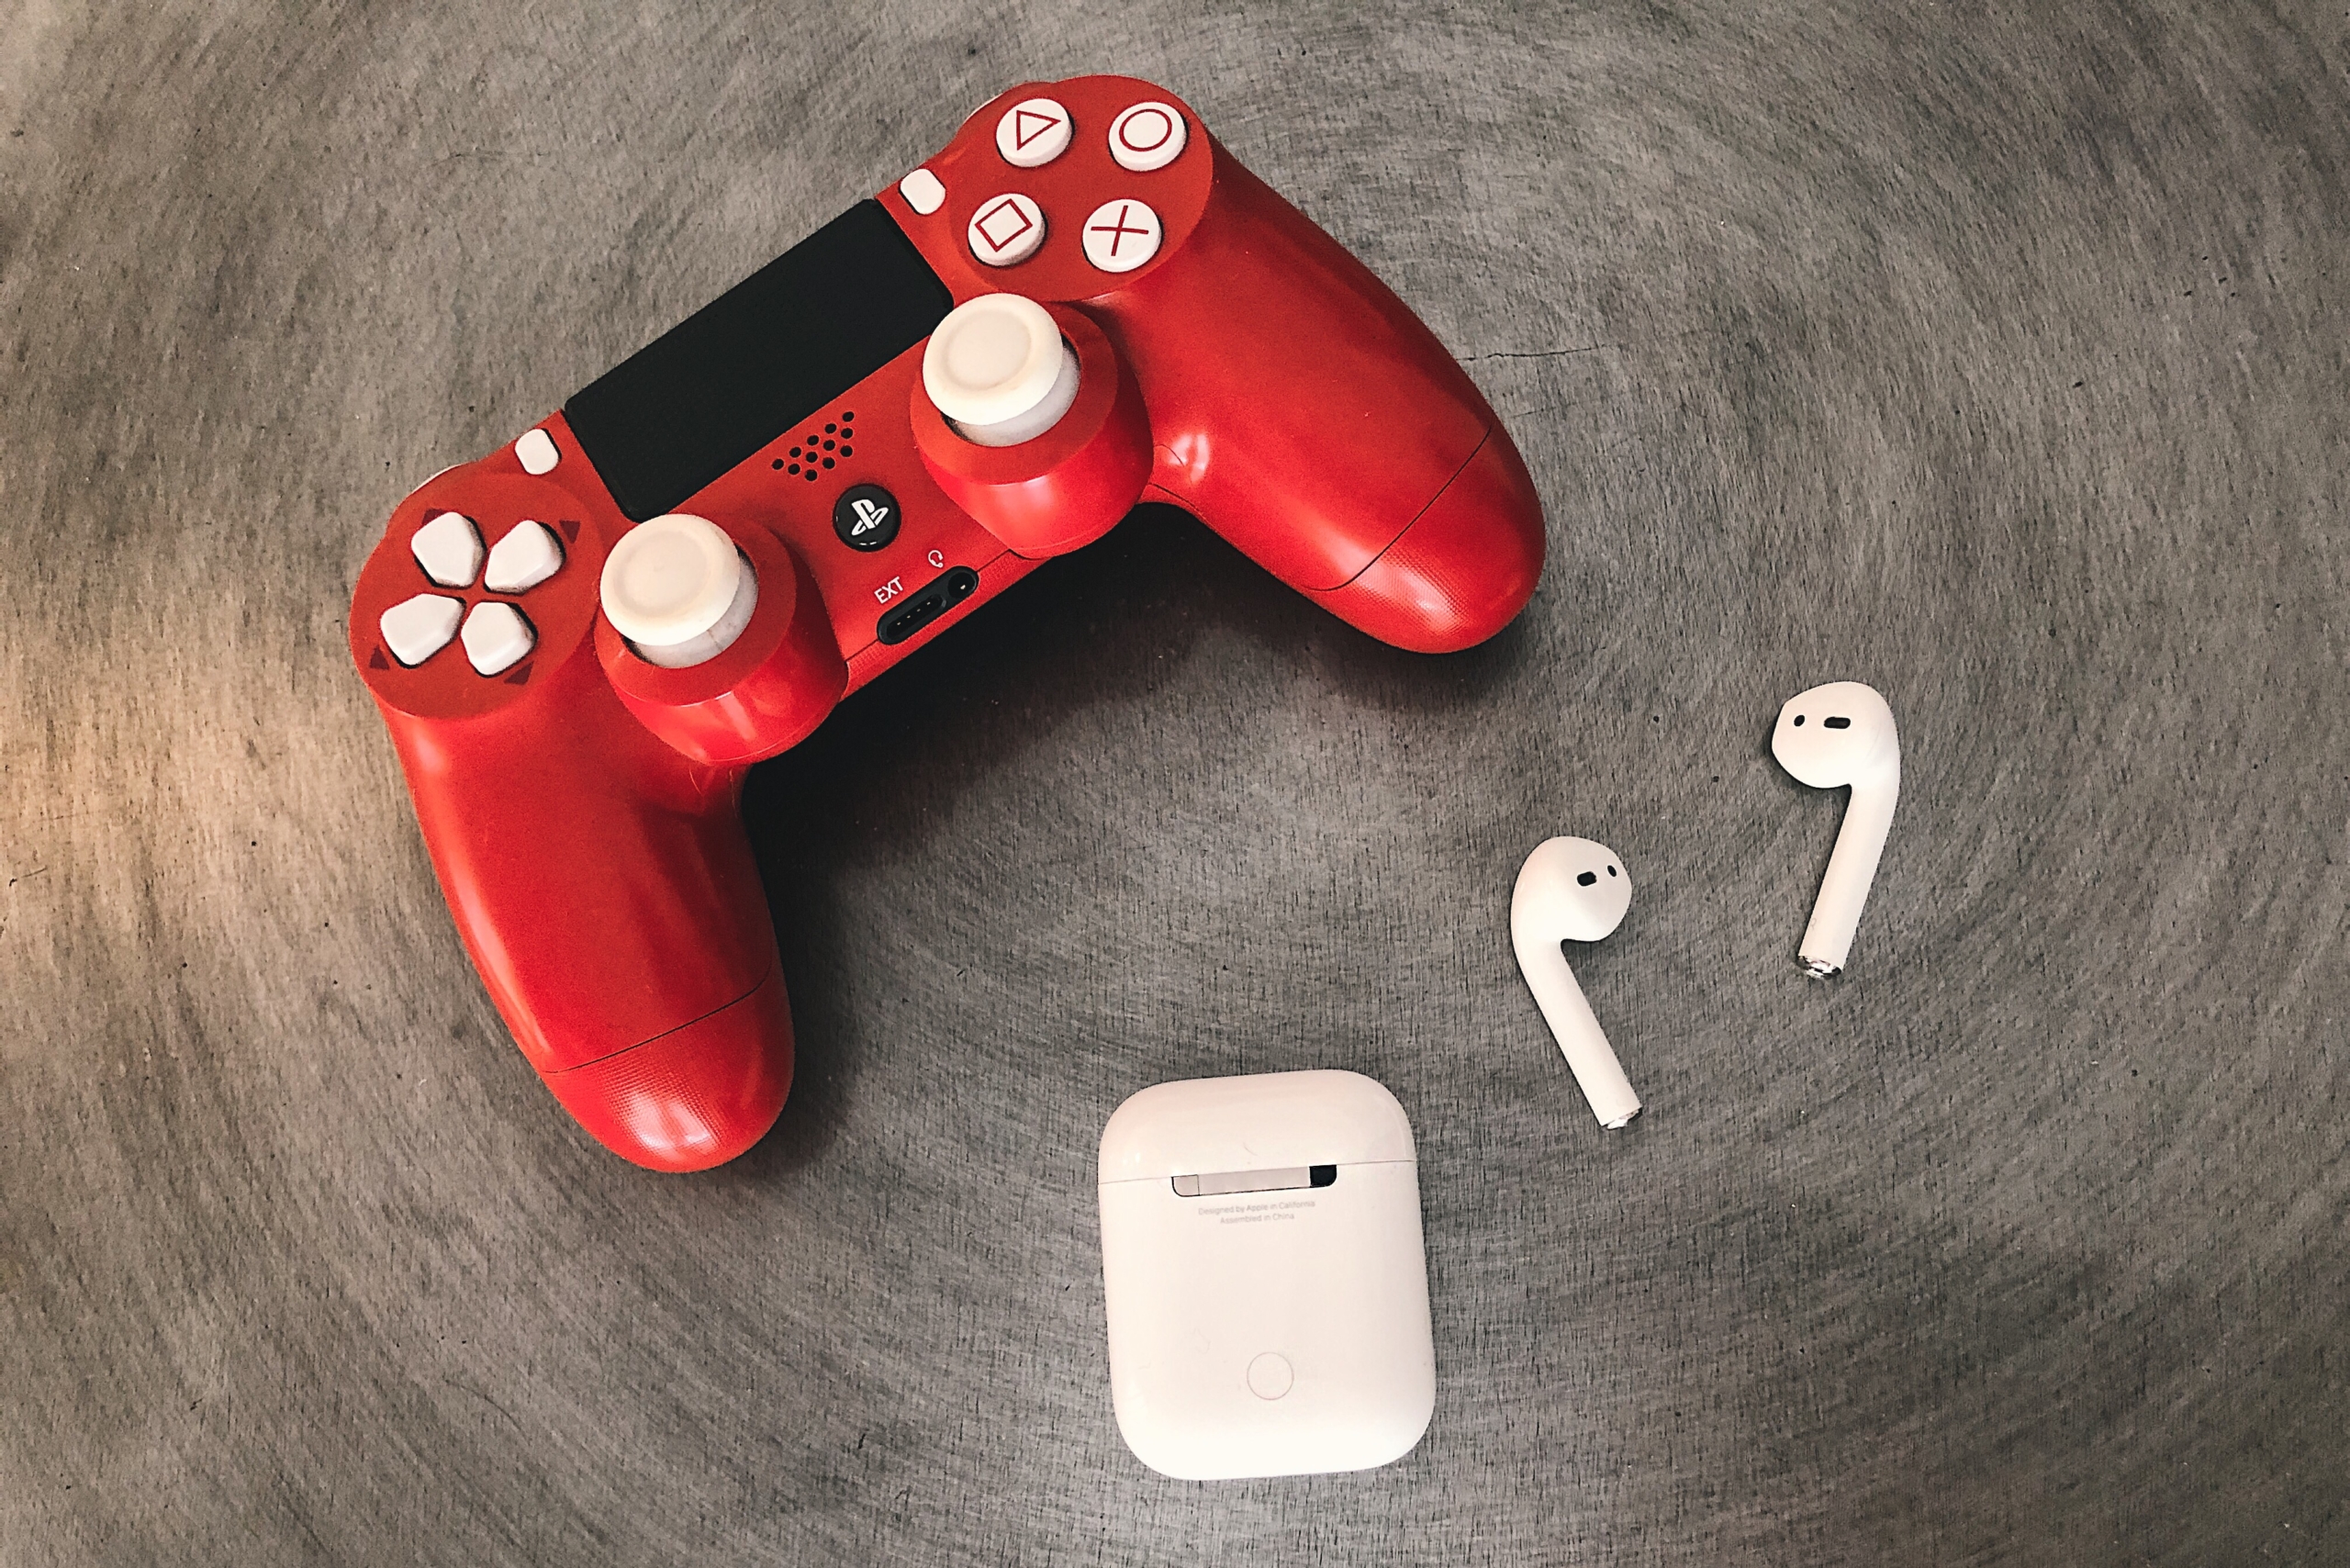 paraply Har lært Banke How to Connect Your AirPods to Your PS4 | Digital Trends